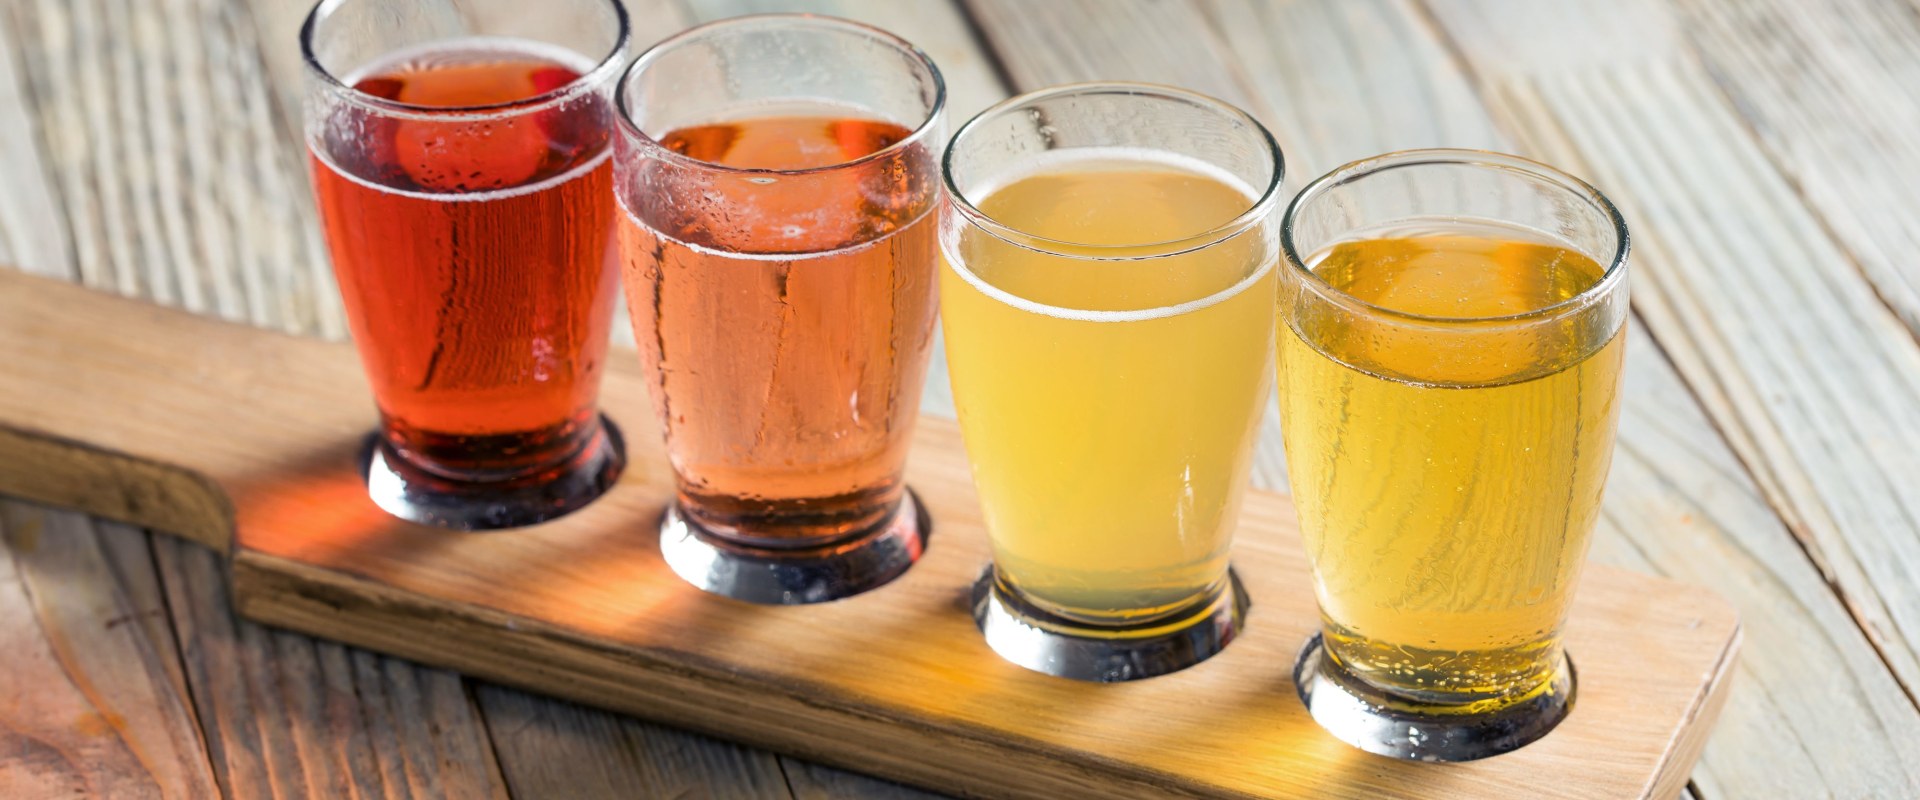 Are ciders healthy to drink?